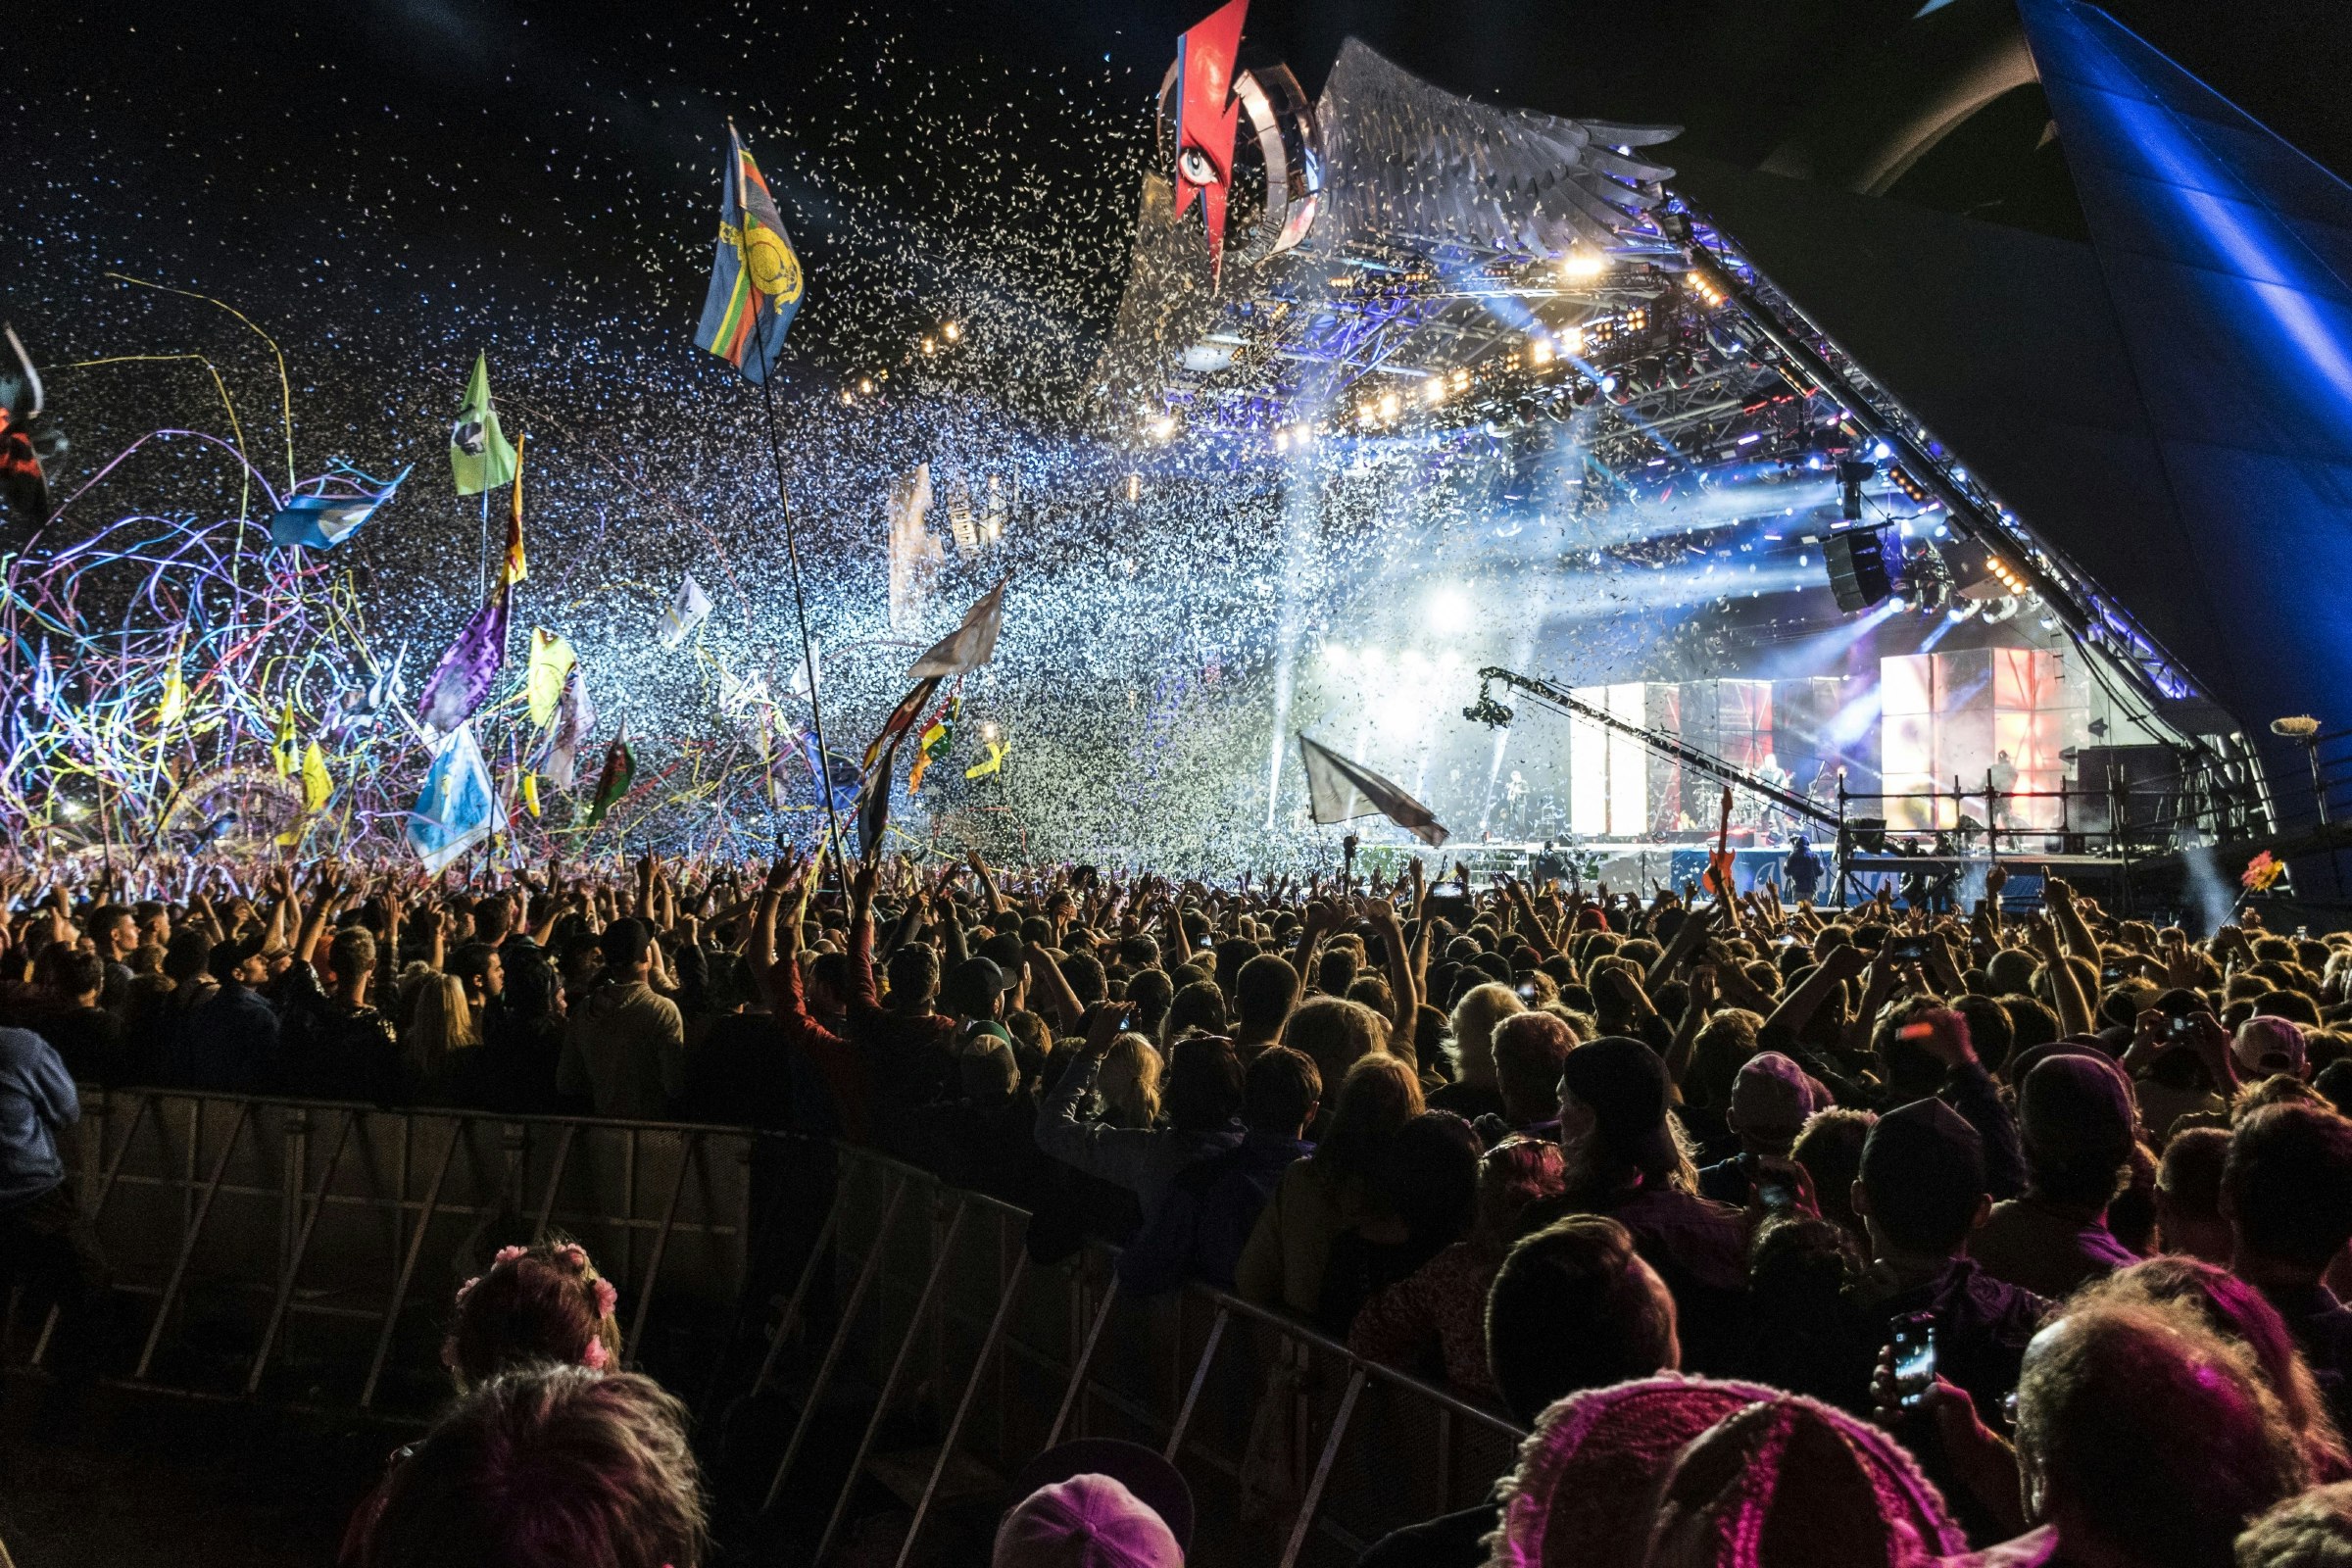 An explosion of confetti, tape and light from a pyramid shaped stage at Glastonbury Festival.